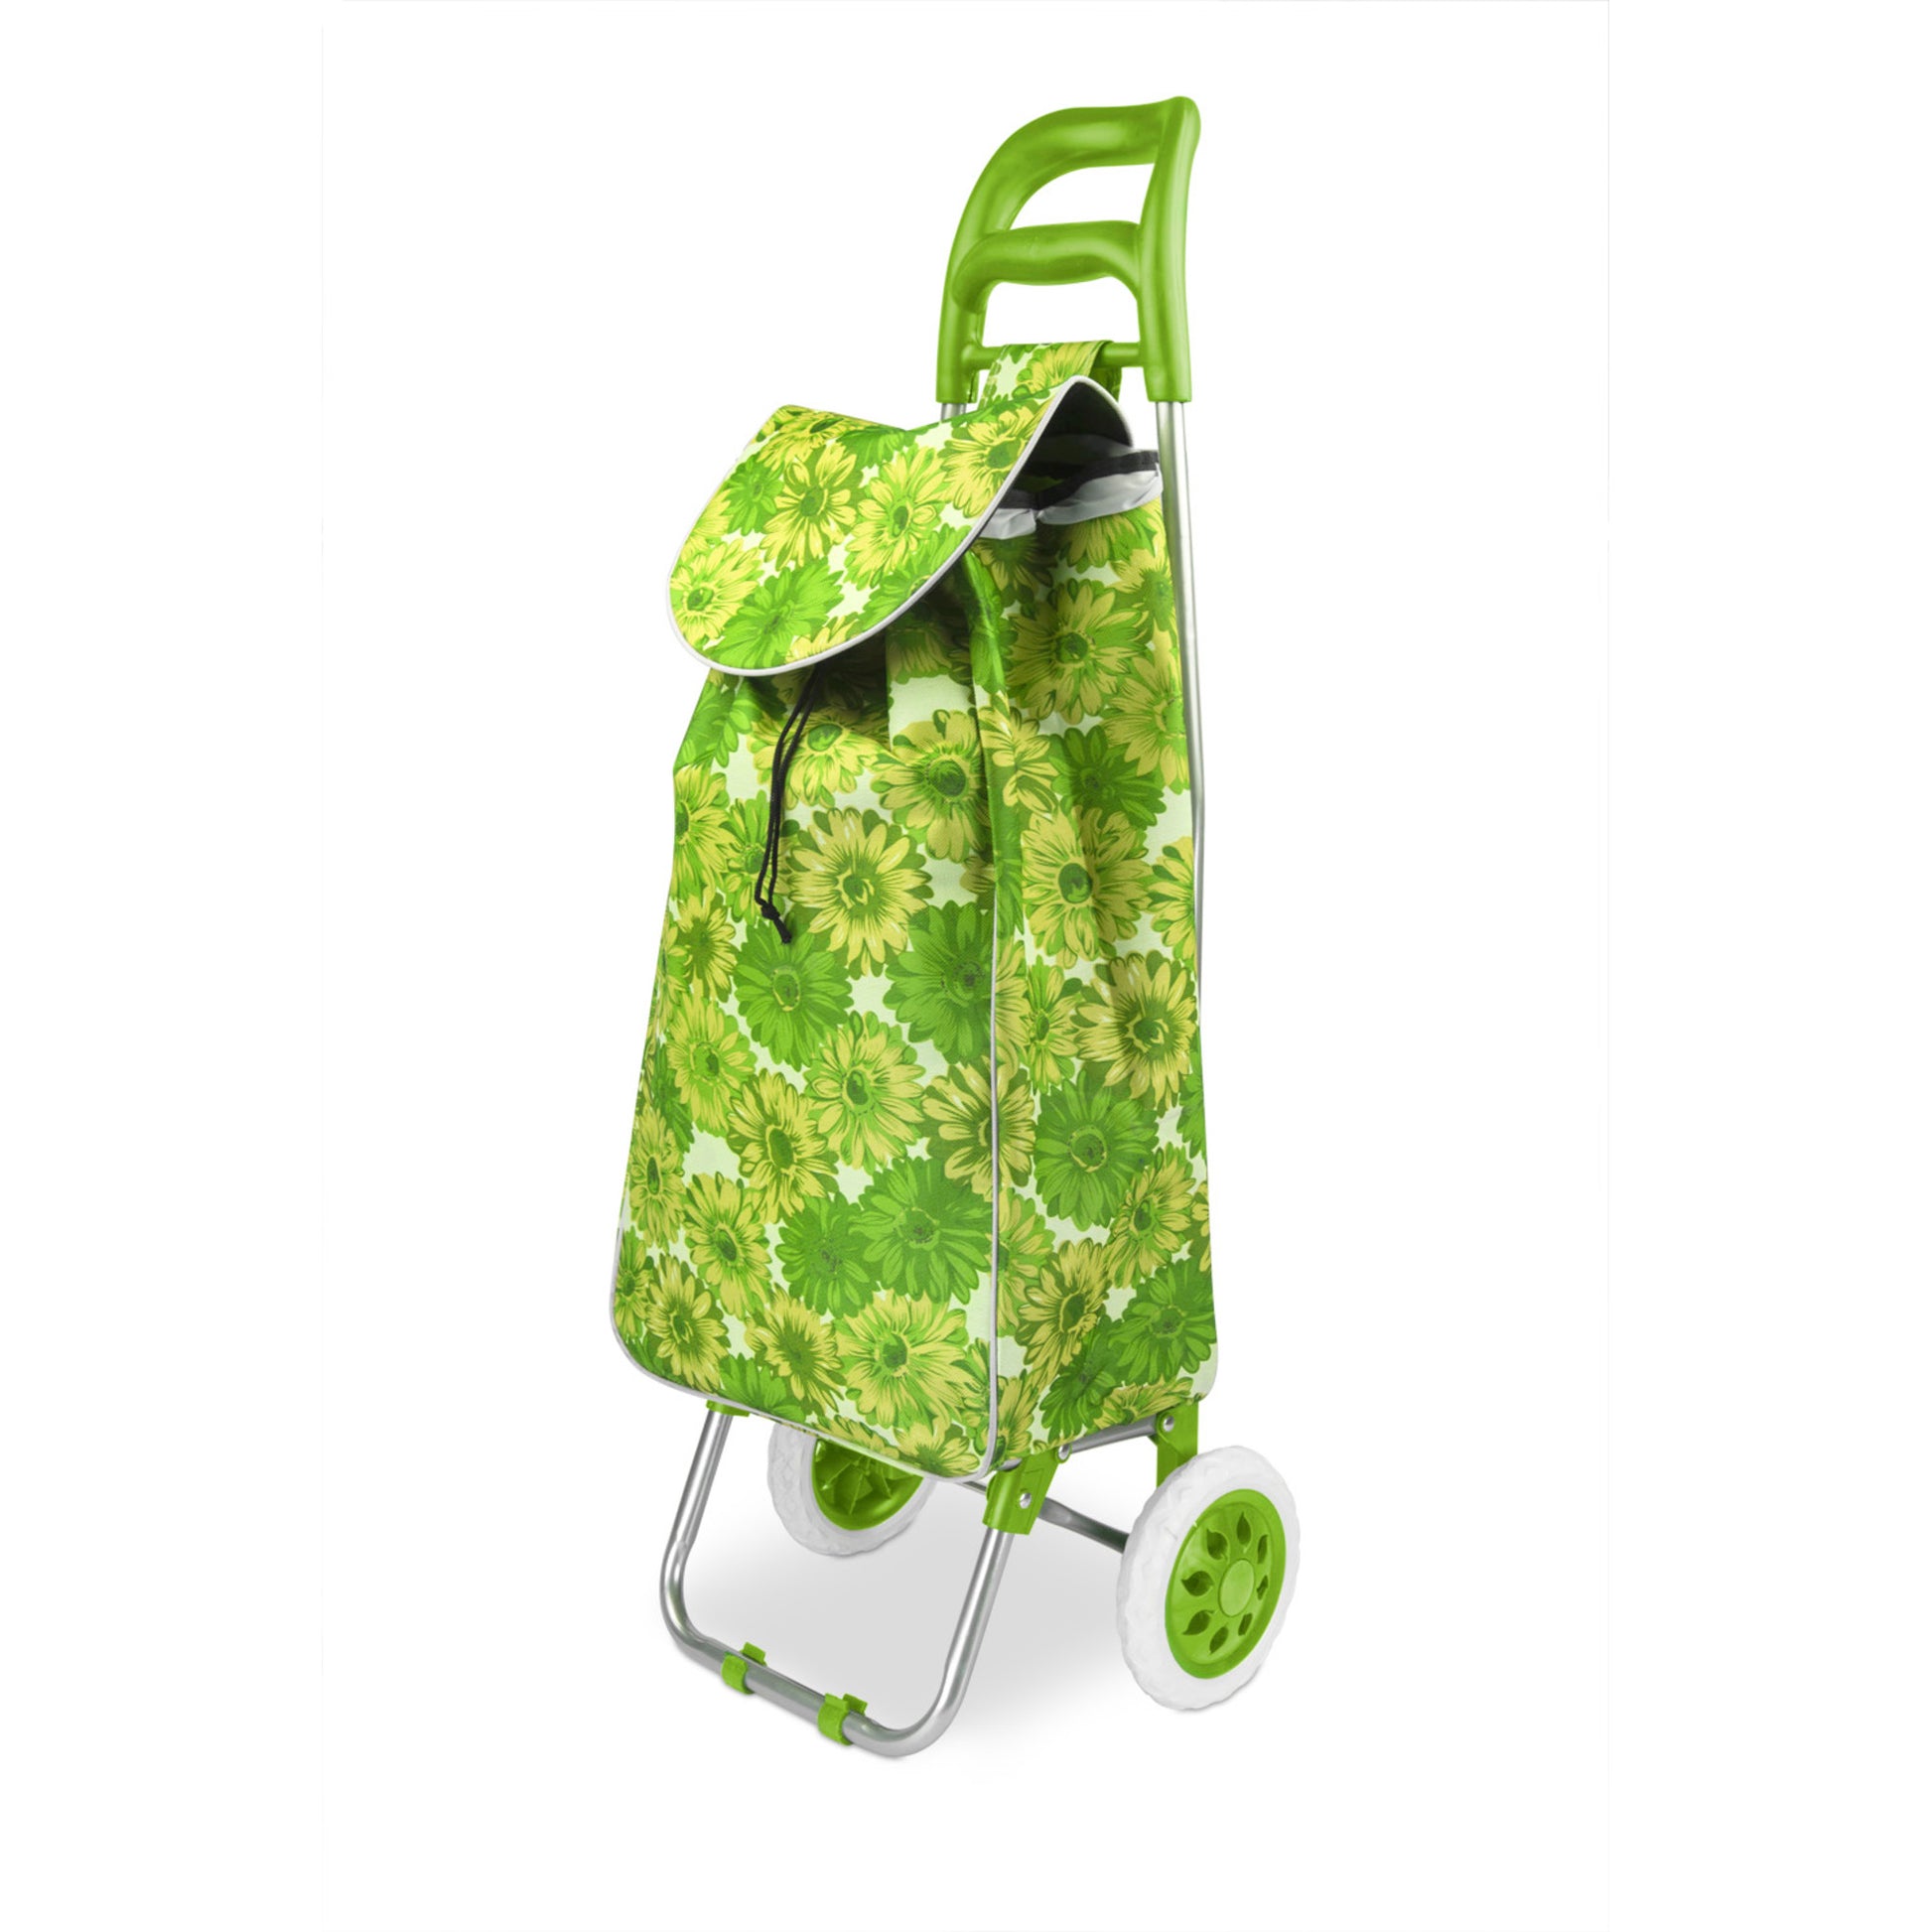 Home Basics Floral Printed Rolling Shopping Cart, Green - Green